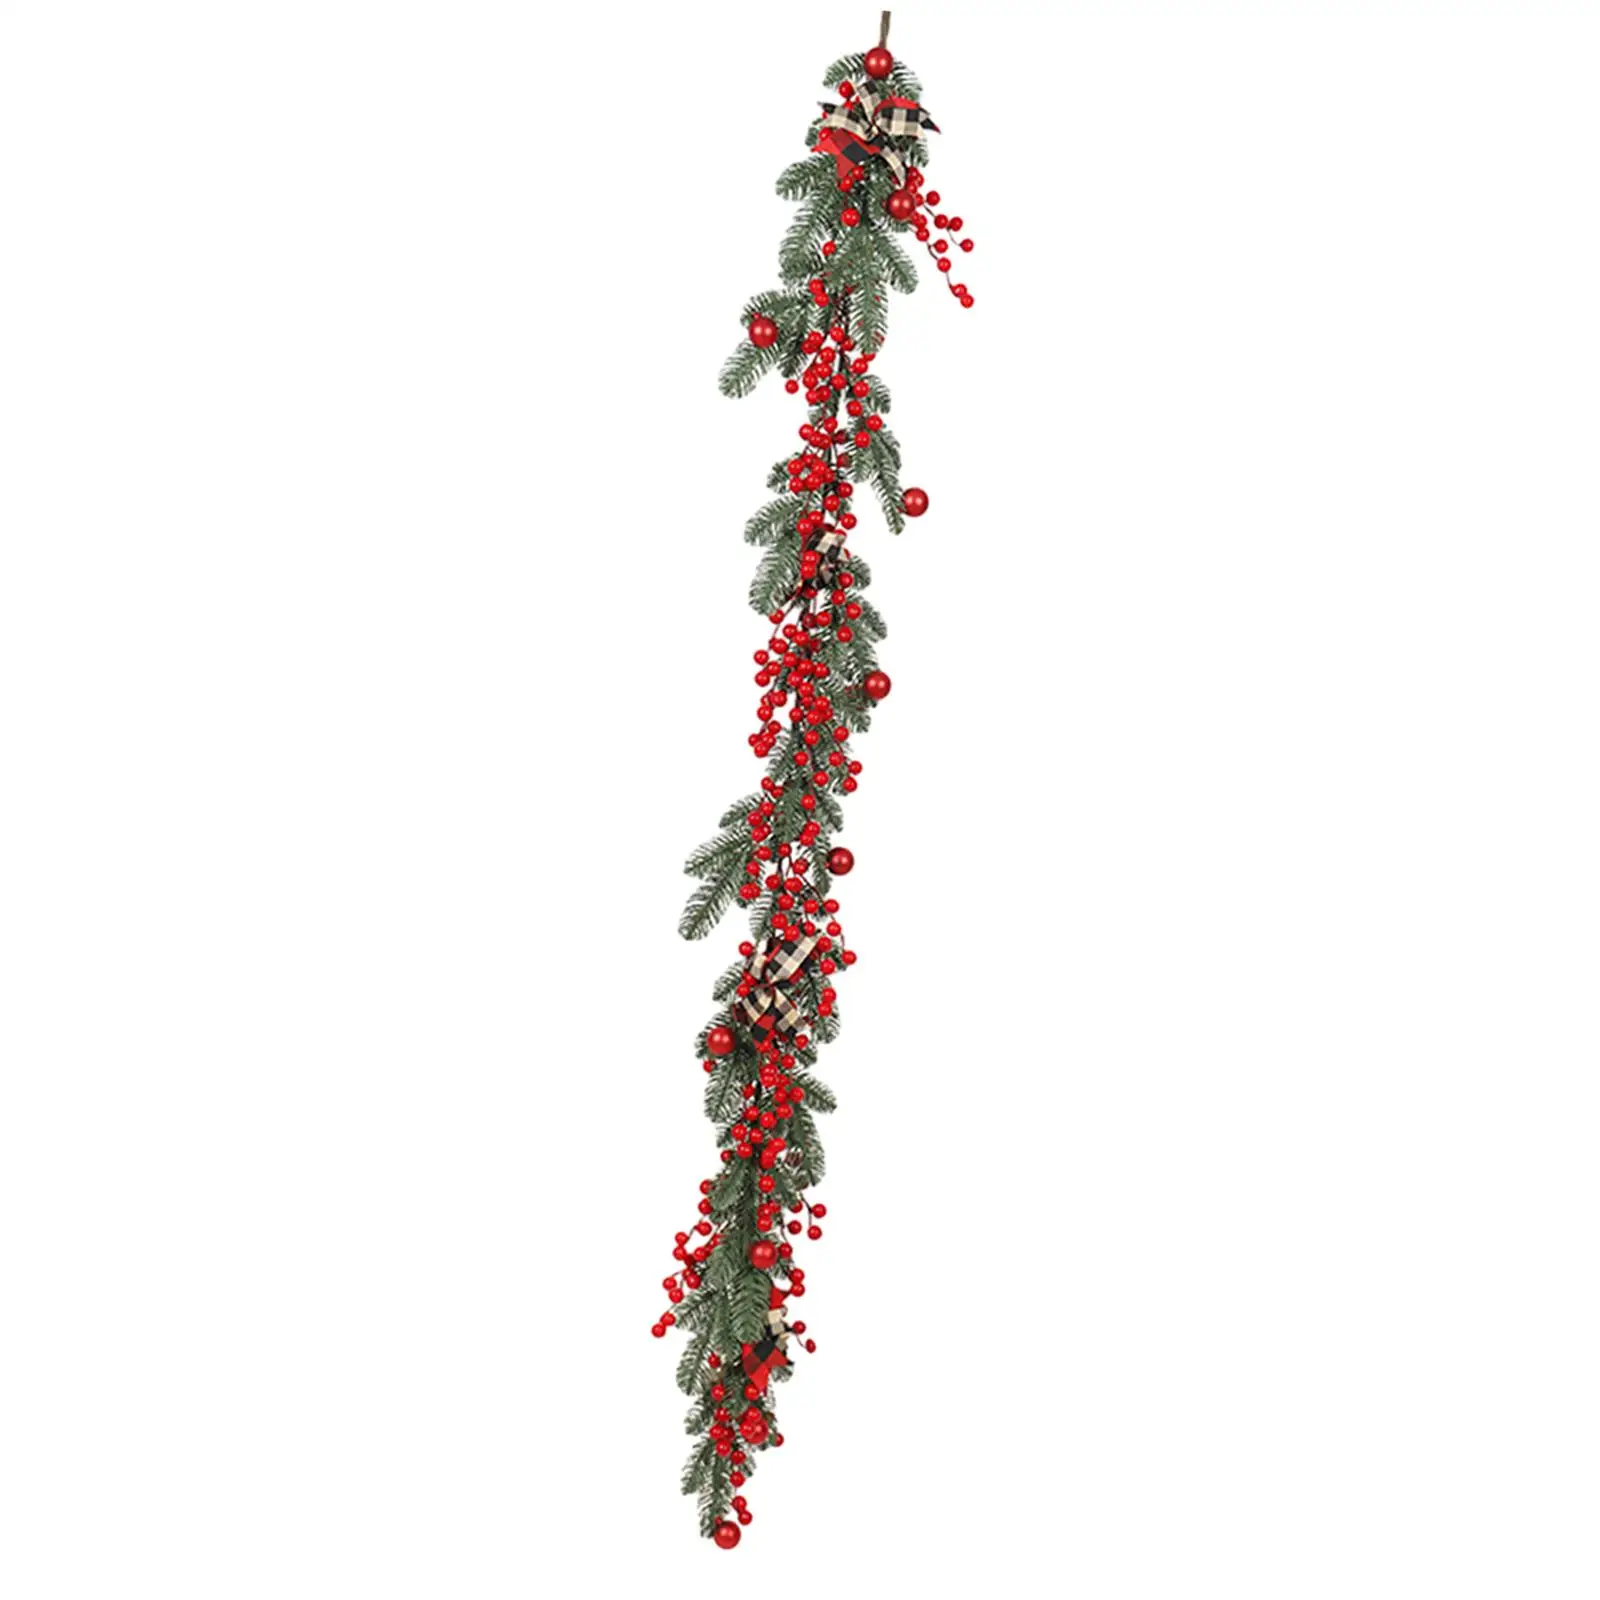 Christmas Wreath Artificial Red Berries with Bow Rustic New Year Ornament